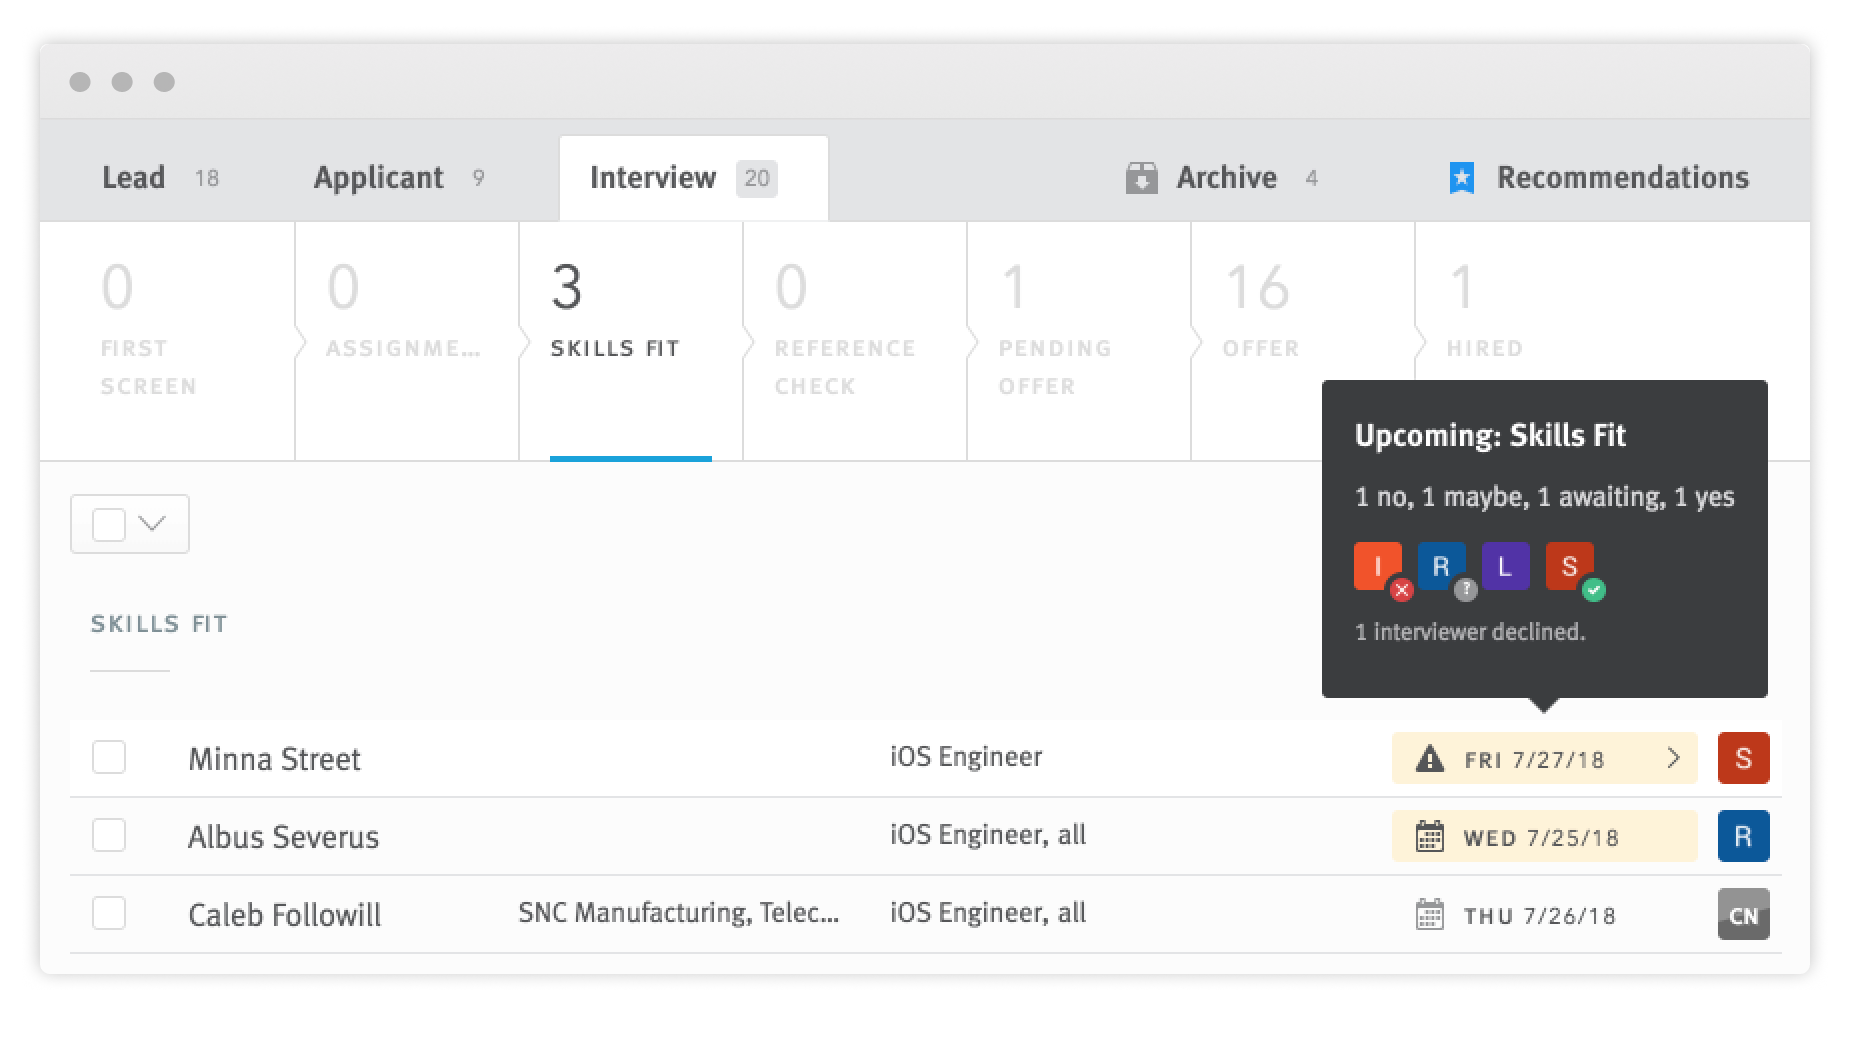 Candidate list in Interviews section of the pipeline with Interview RSVPs revealed on hover